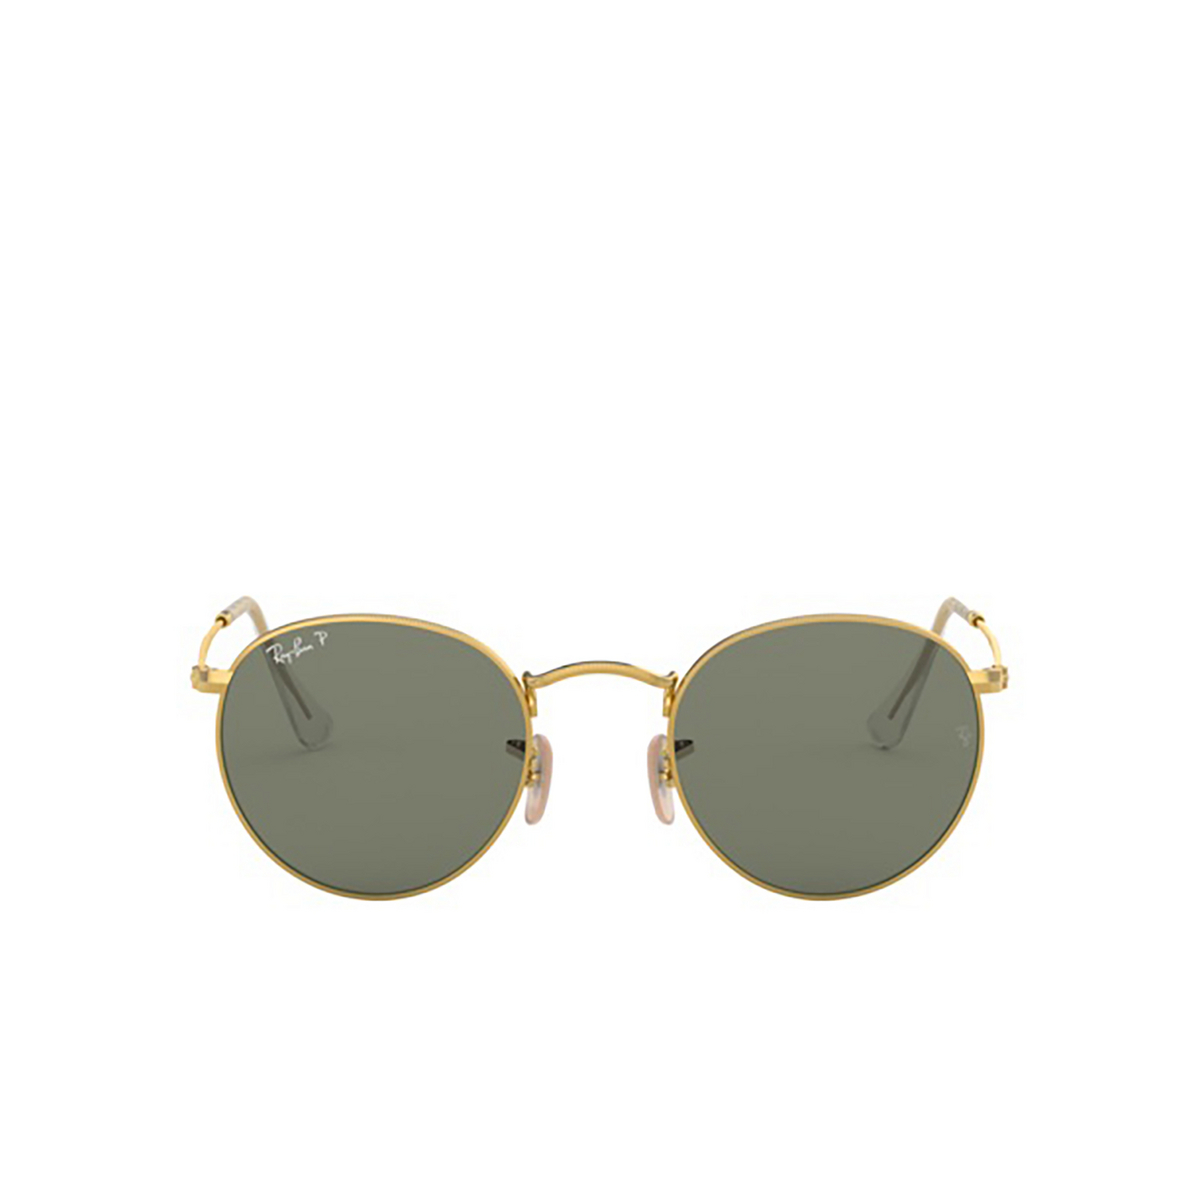 Ray-Ban ROUND METAL Sunglasses 001/58 ARISTA - front view